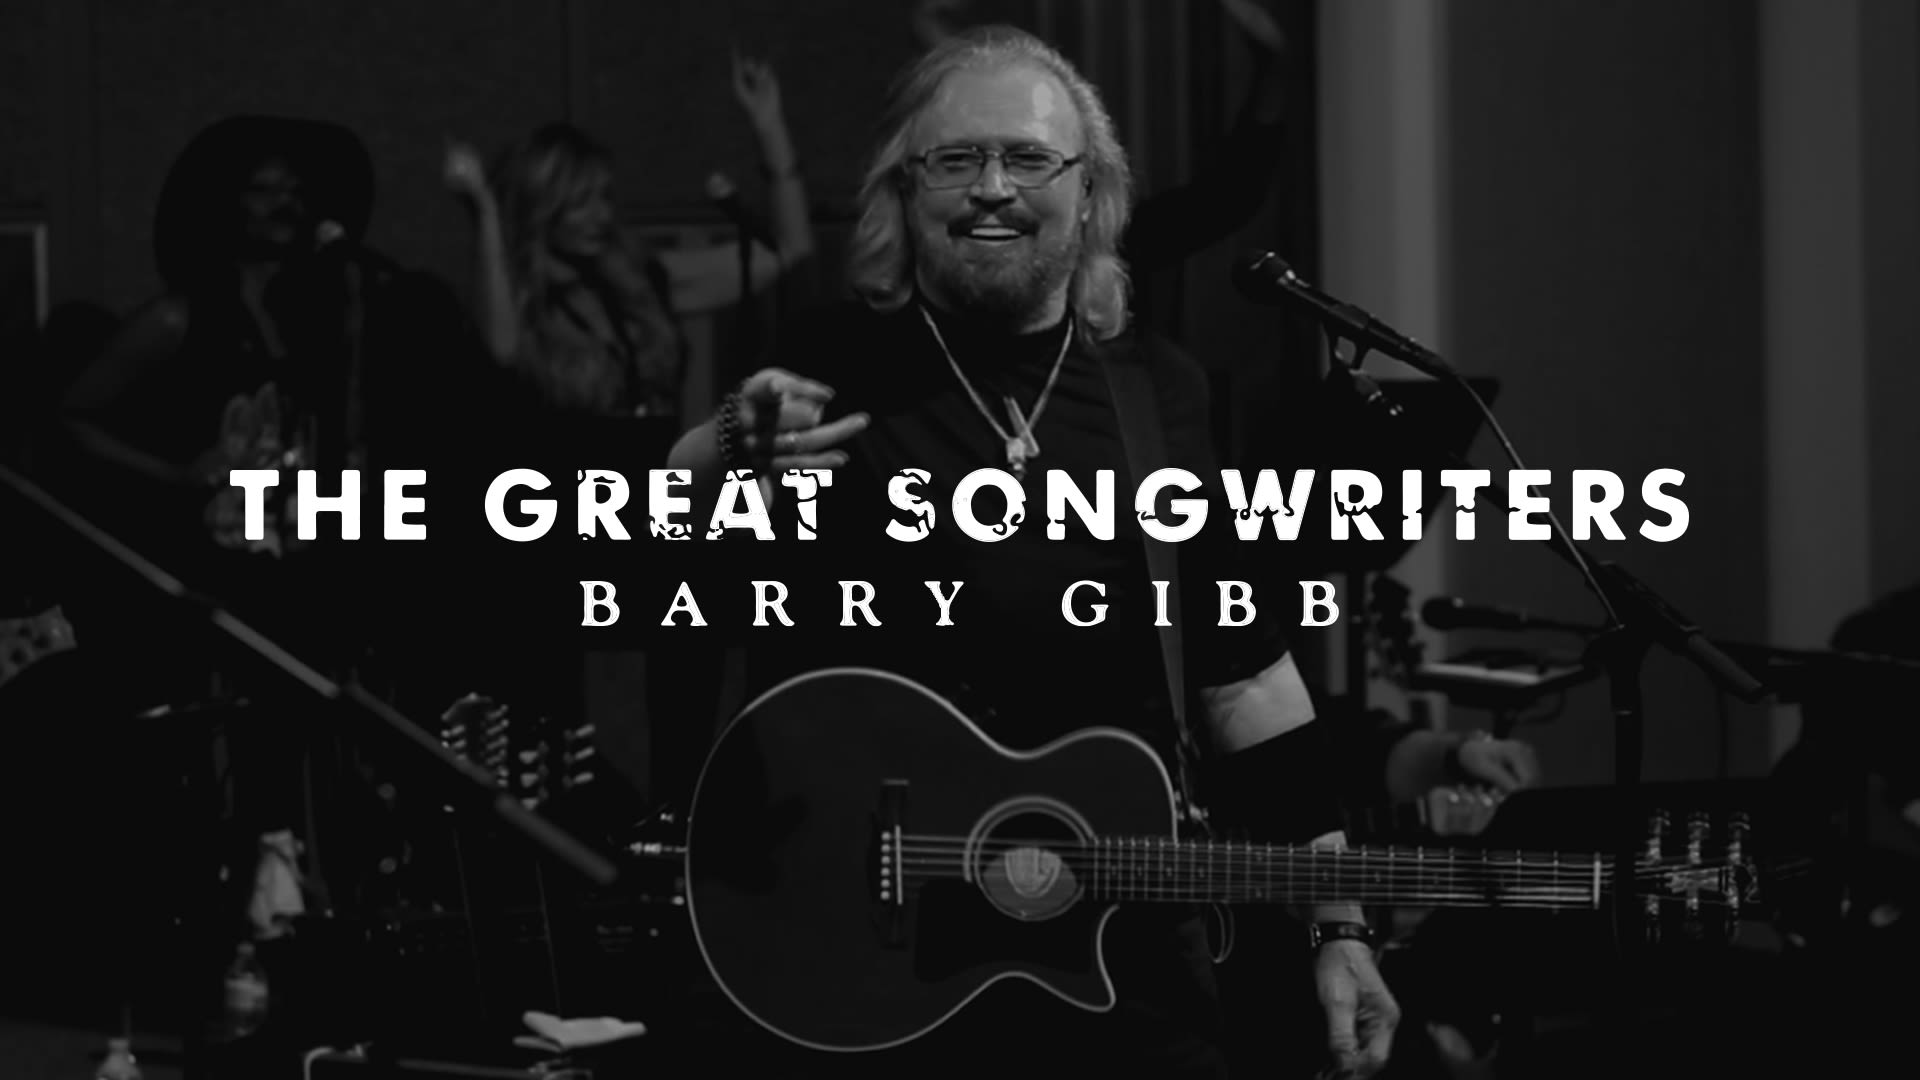 Barry Gibb - The Great Songwriters